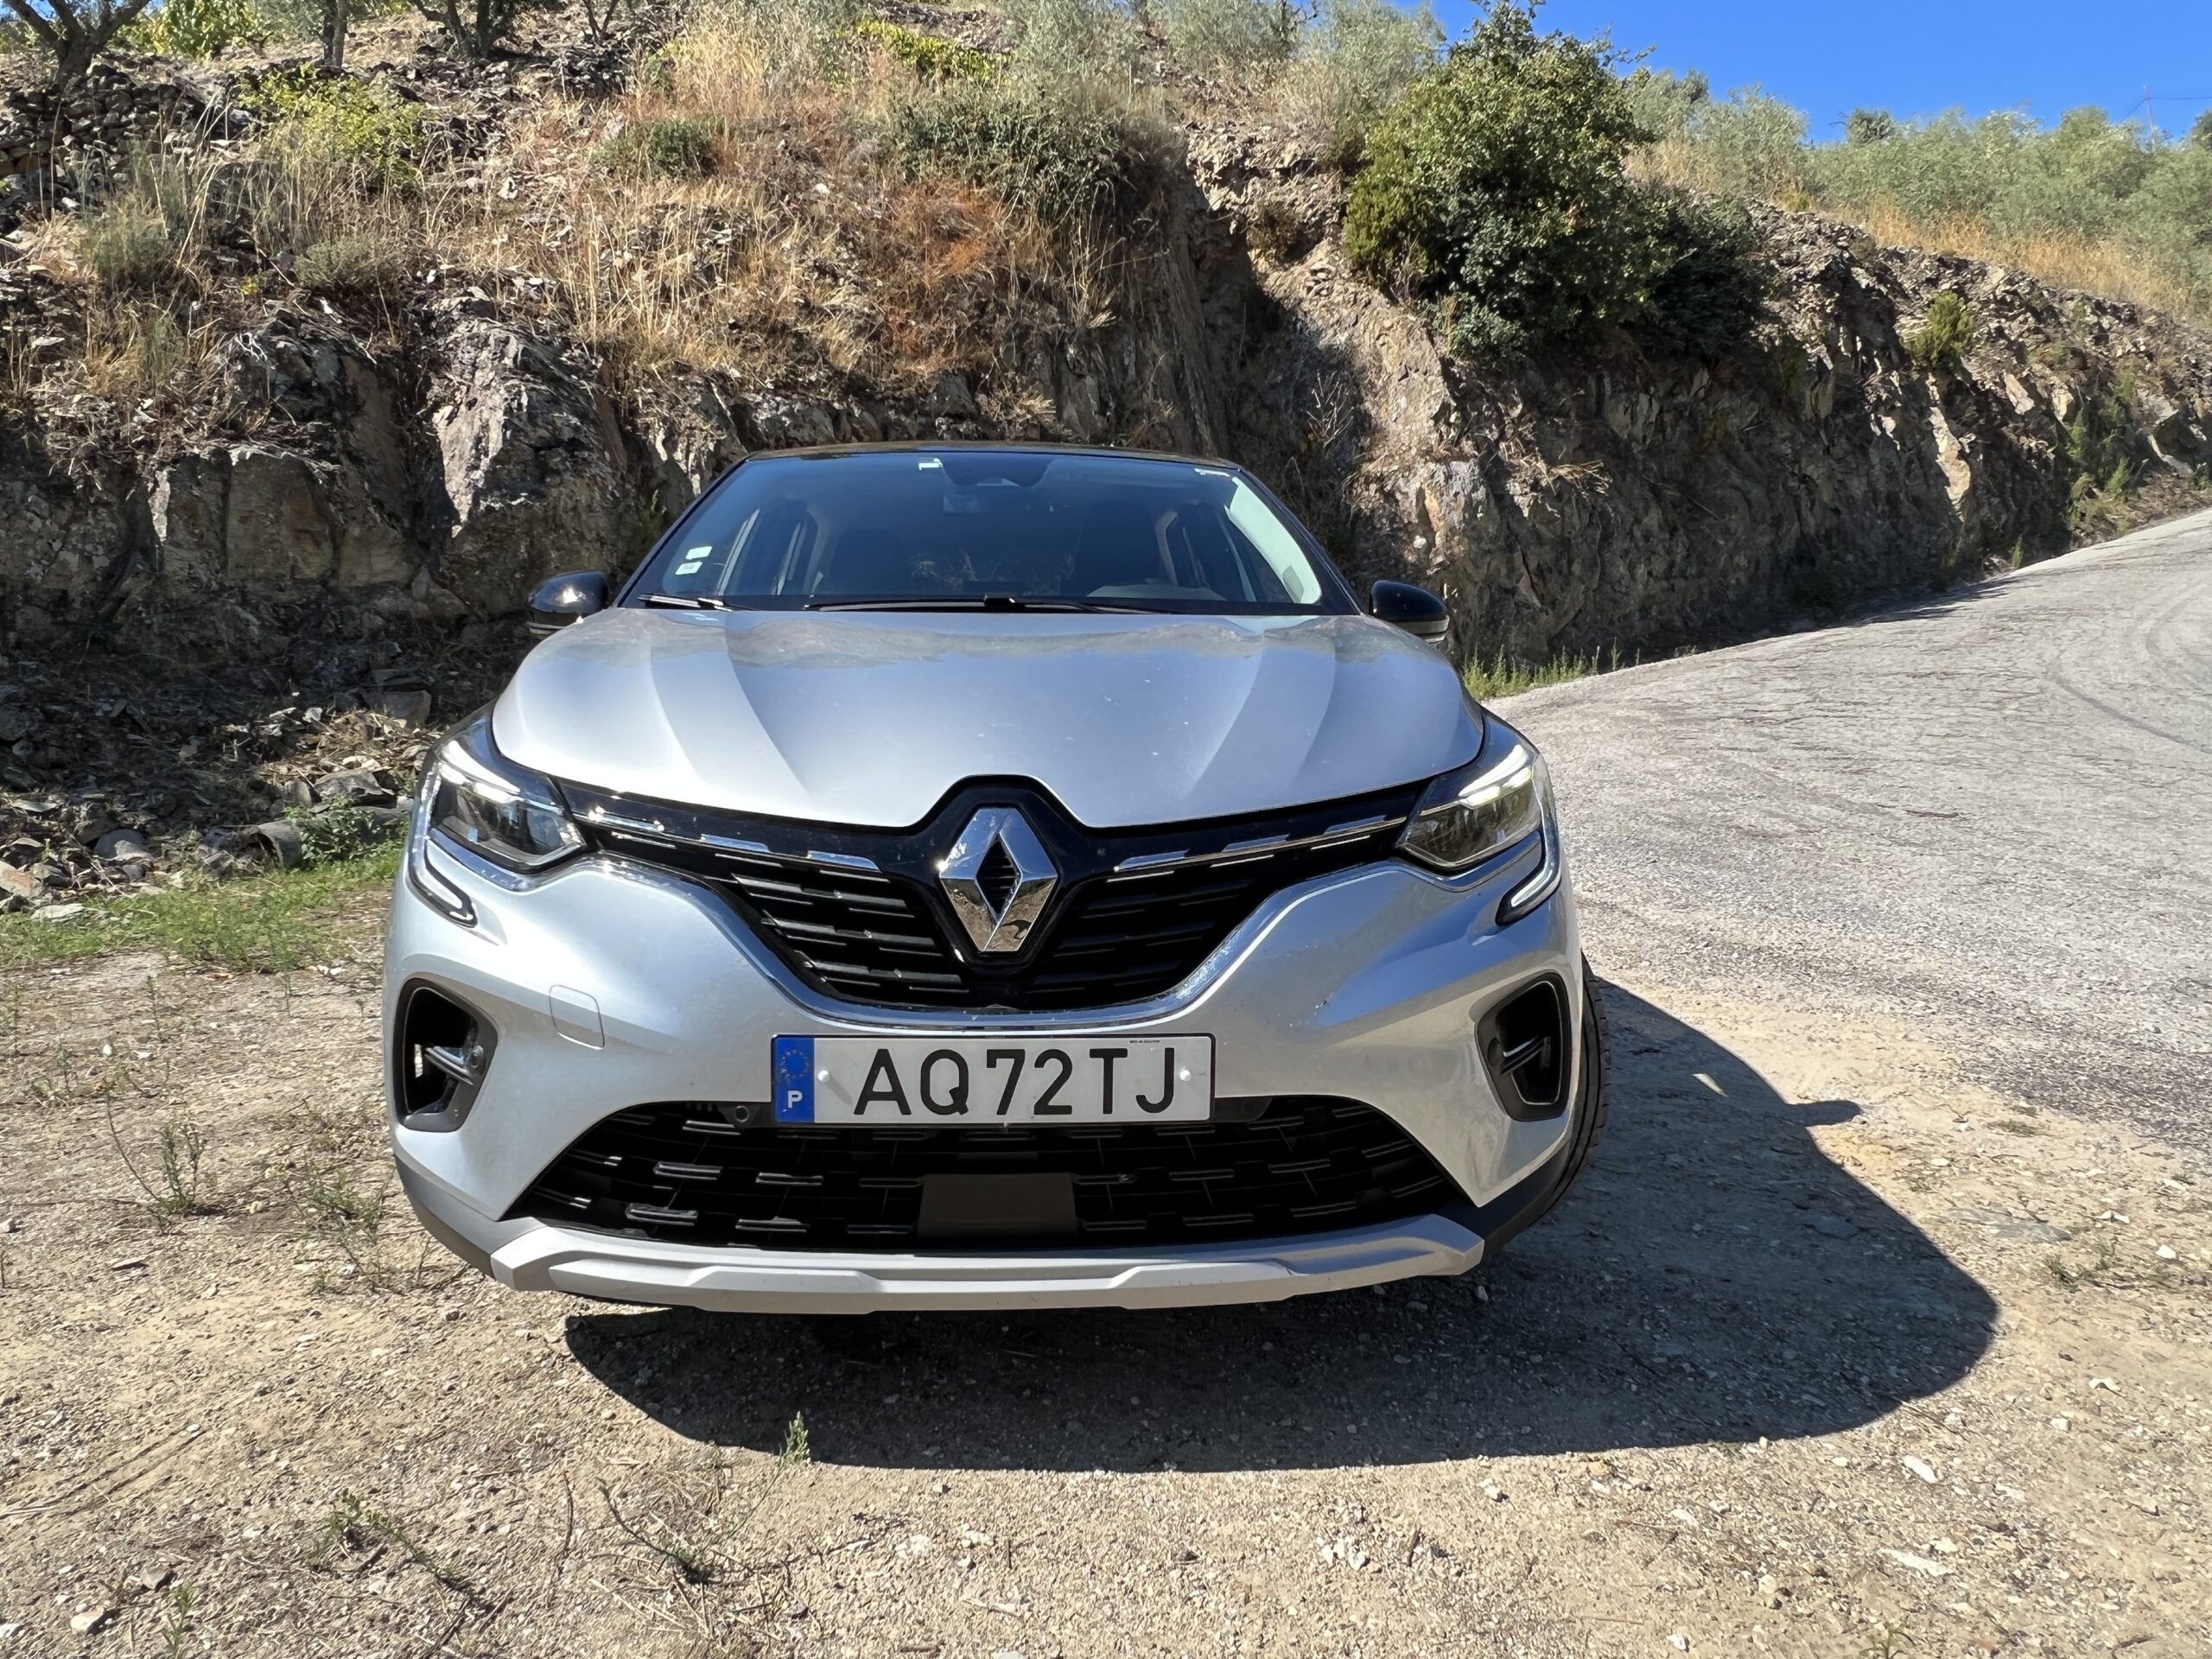 2021 Renault Captur Review: Ain't Great but Is Still Charming As Hell